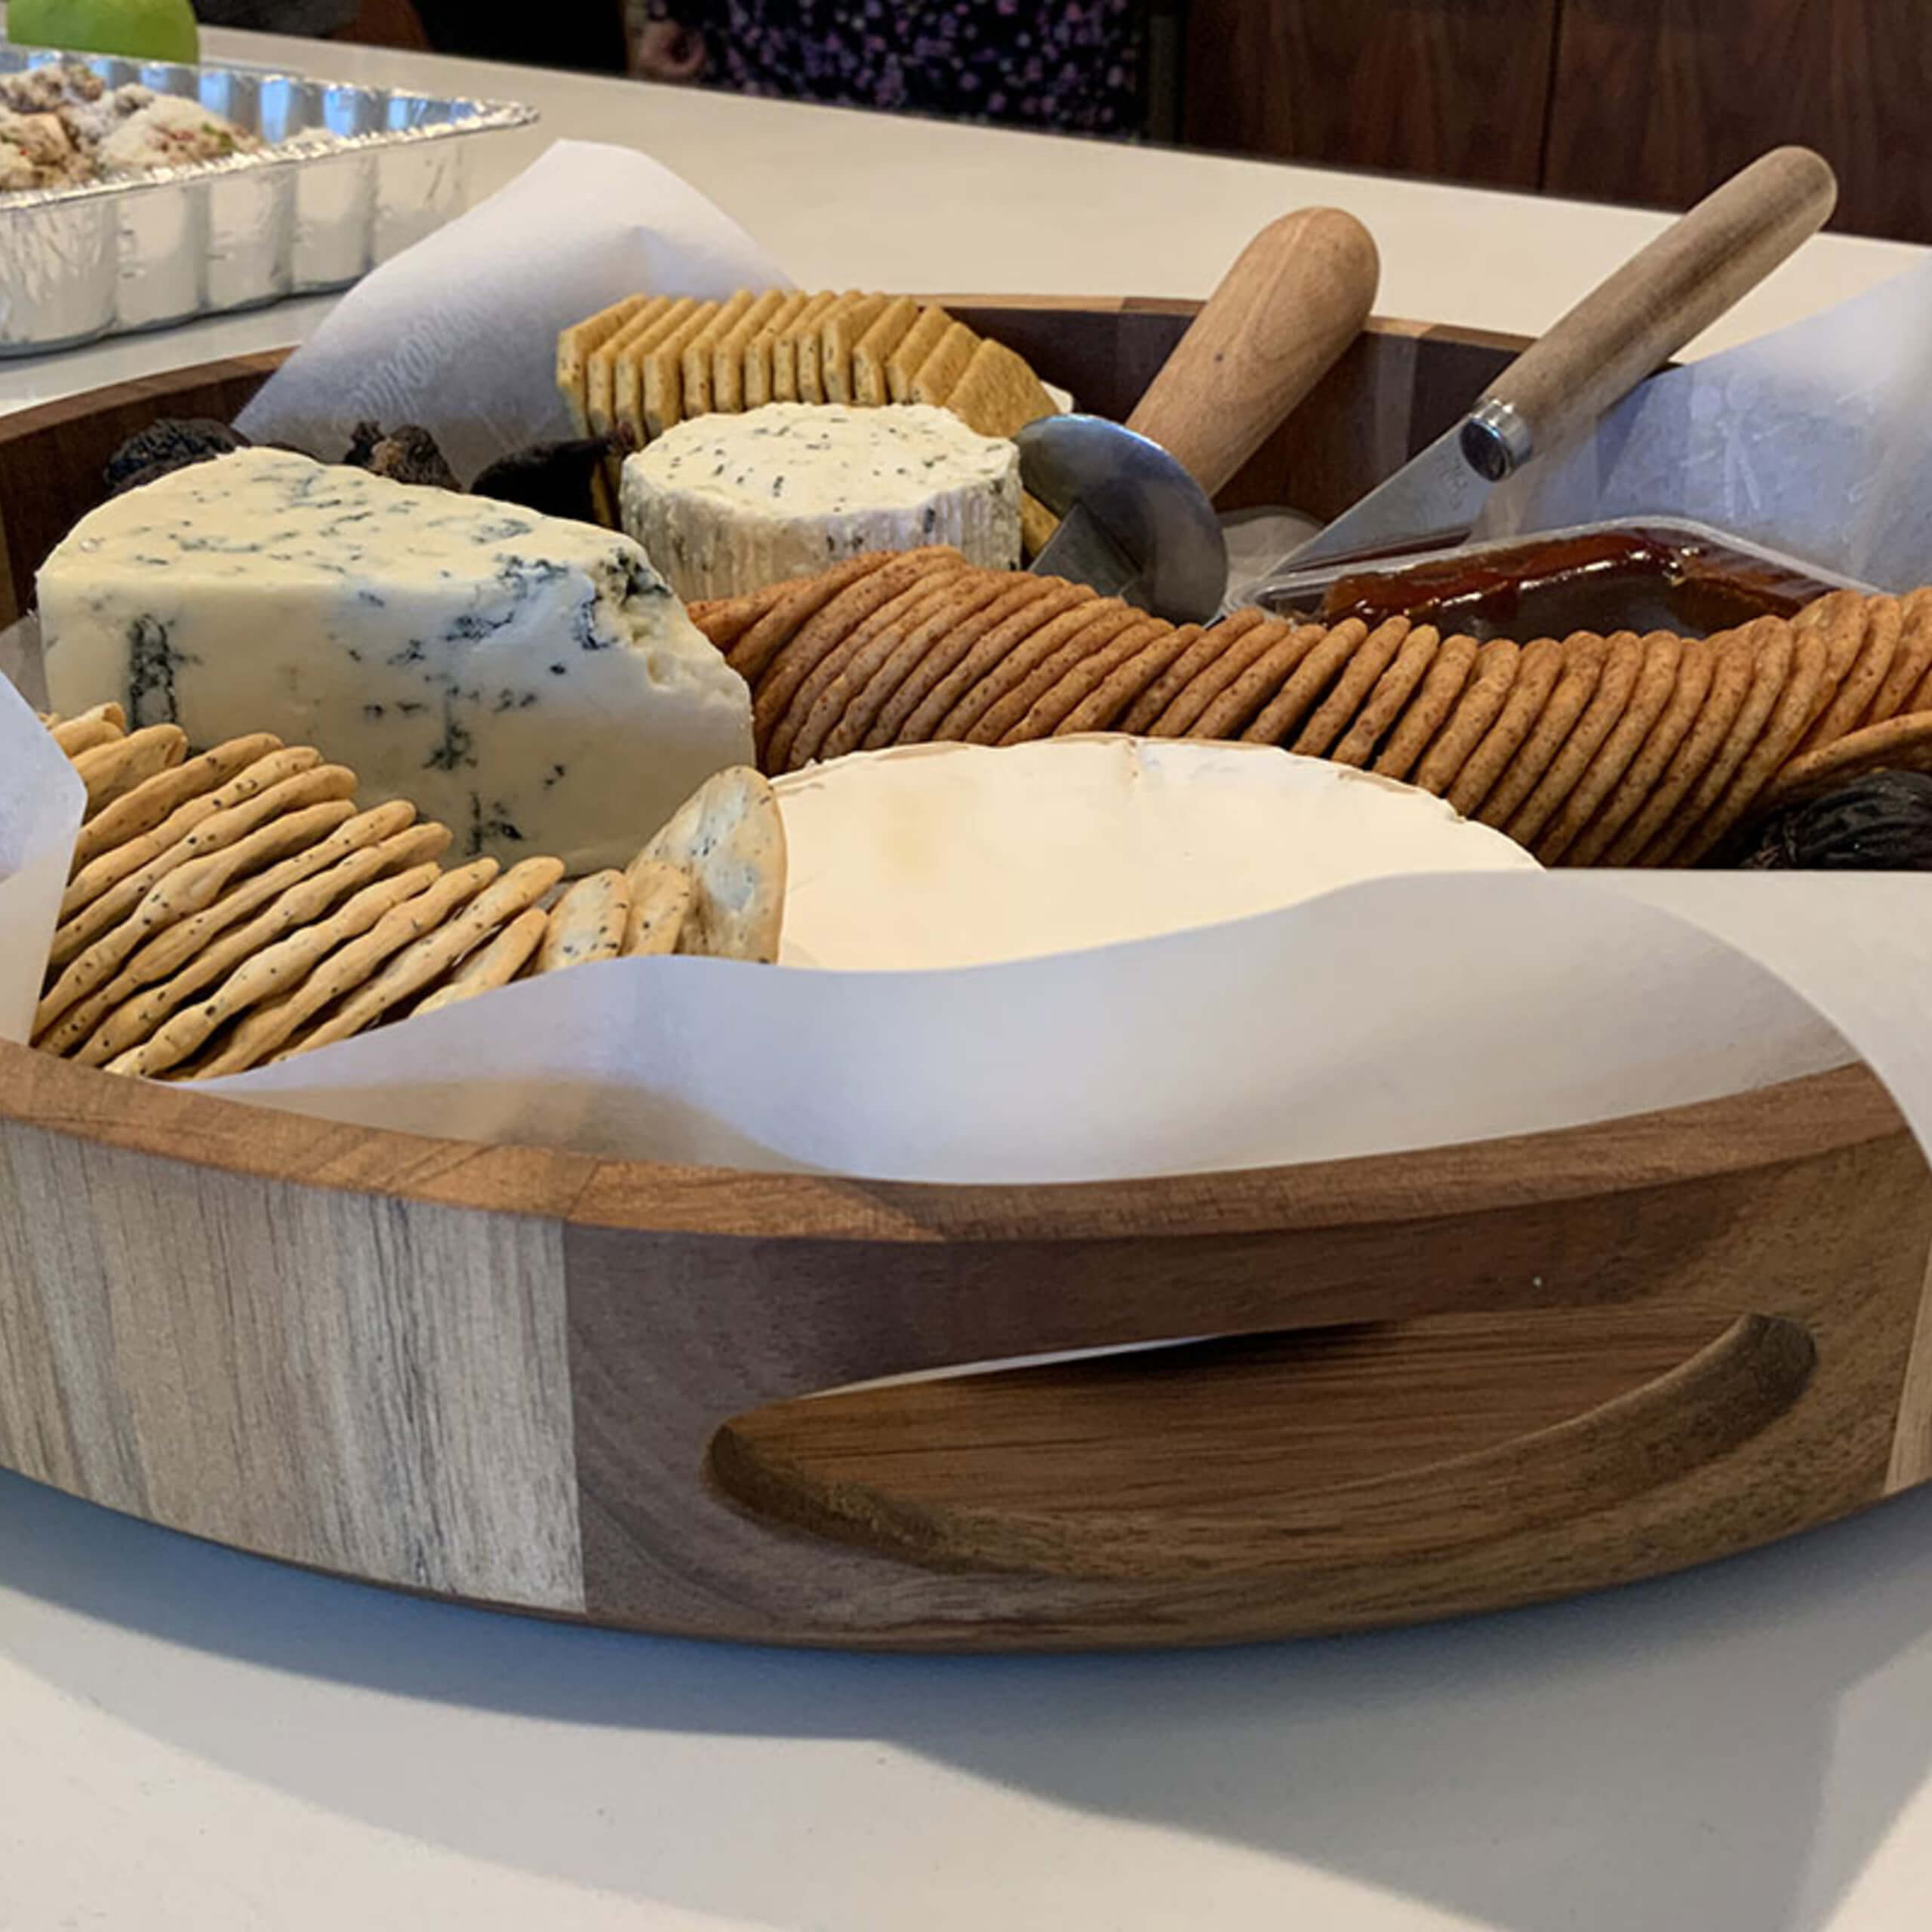 Creating A Cheese Tray | My Curated Tastes